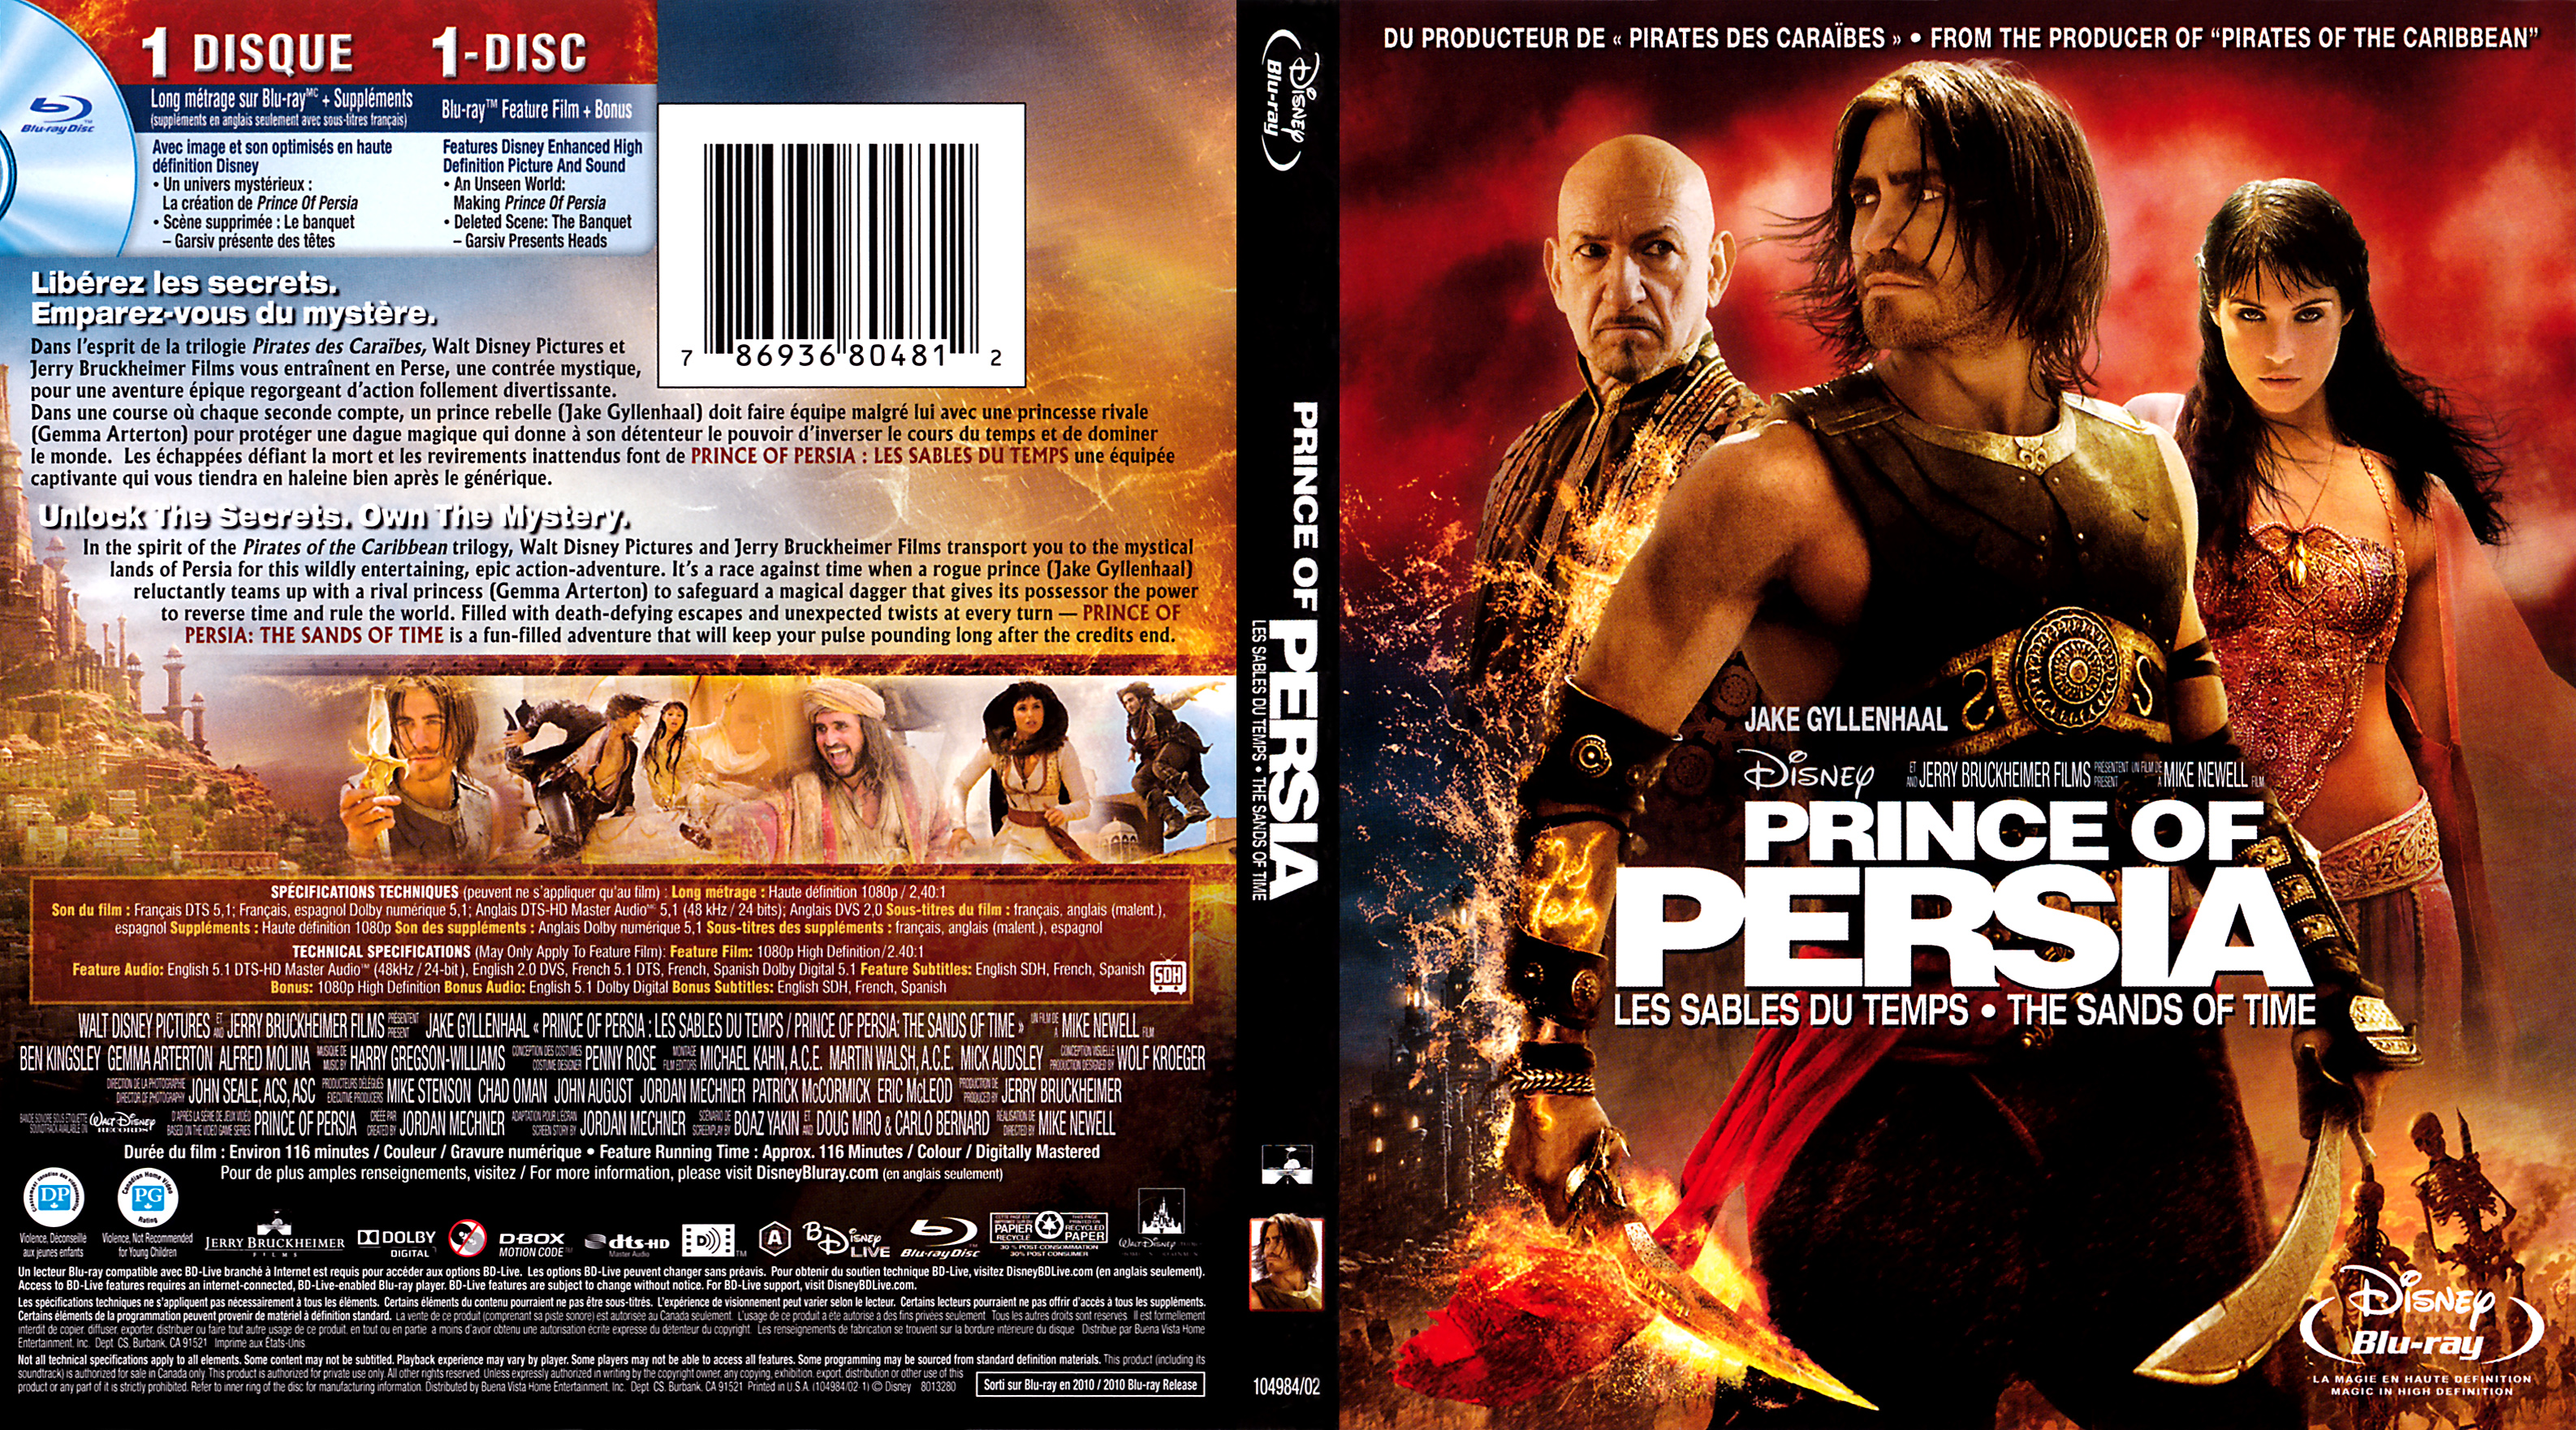 Jaquette DVD Prince of persia - les sables du temps (BLU-RAY) (Canadienne)